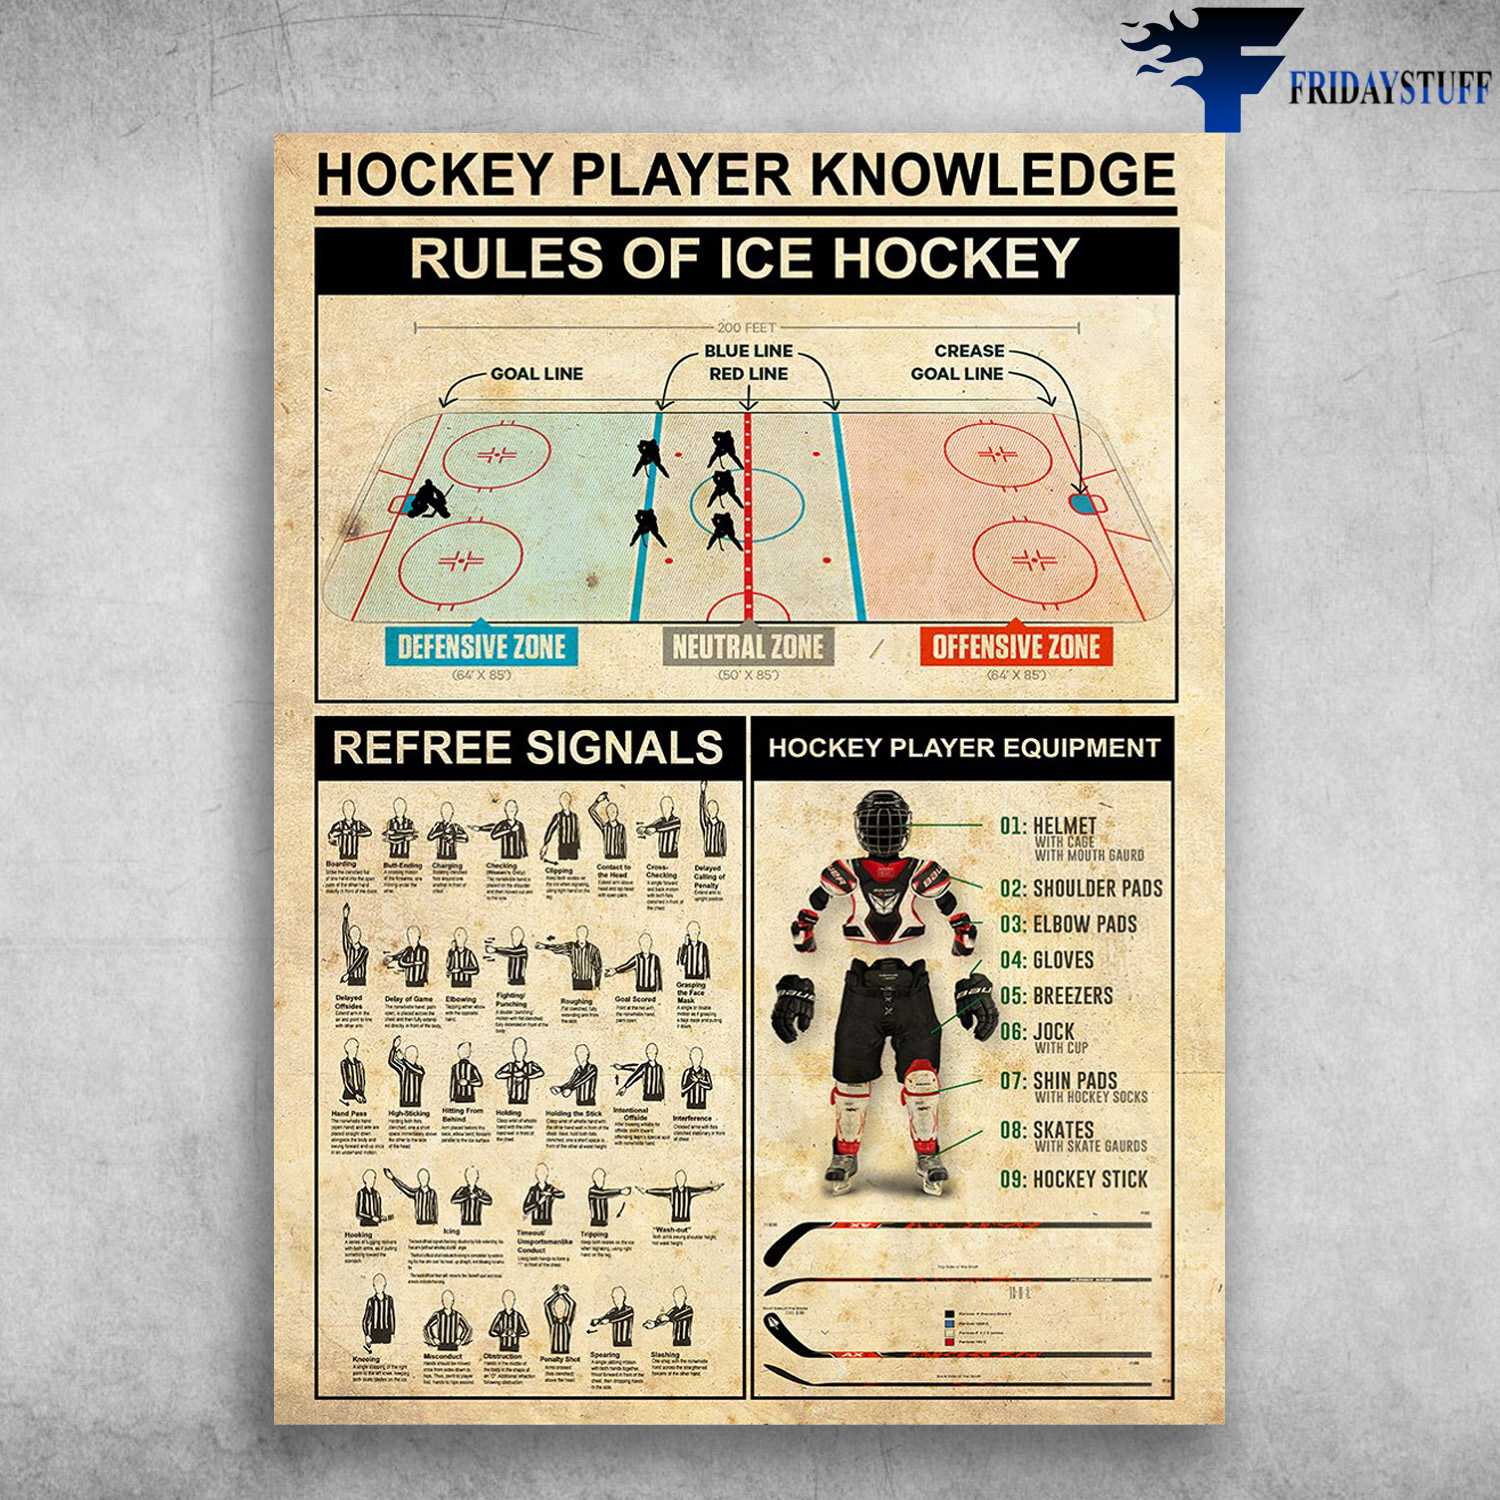 Hockey Poster - Hockey Player Knowledge, Rules Of Ice Hockey, GoalLine, Blue Line, Red Line, Defensive Zone, Neutral Zone, Offensive Zone, Refree Signals, Hockey Player Equipment